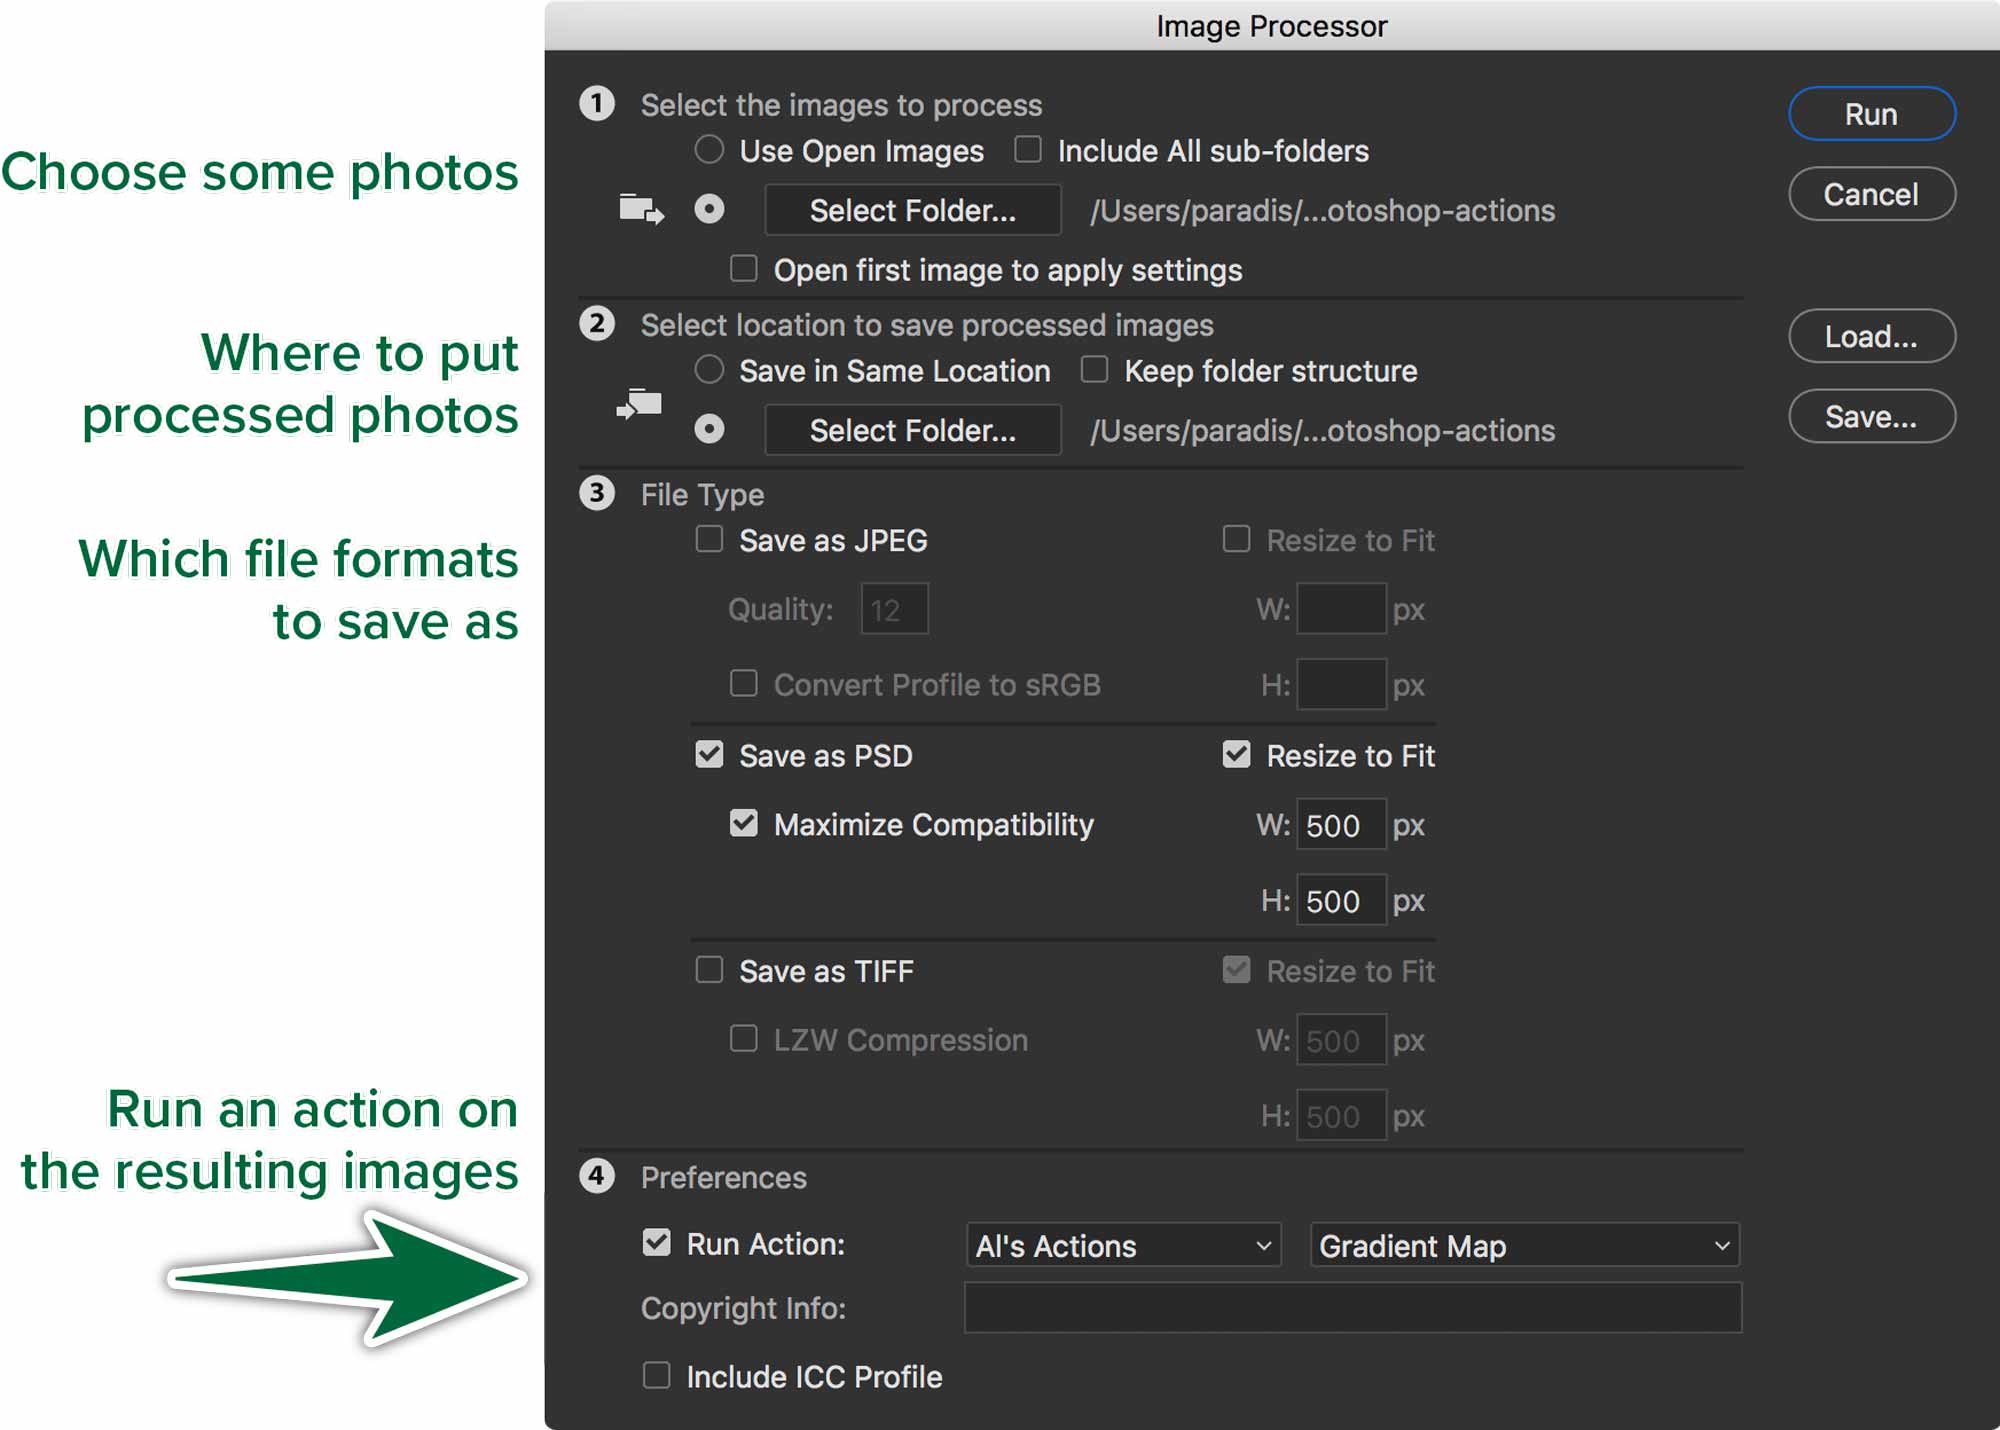 photoshop-actions-image-processor-actions